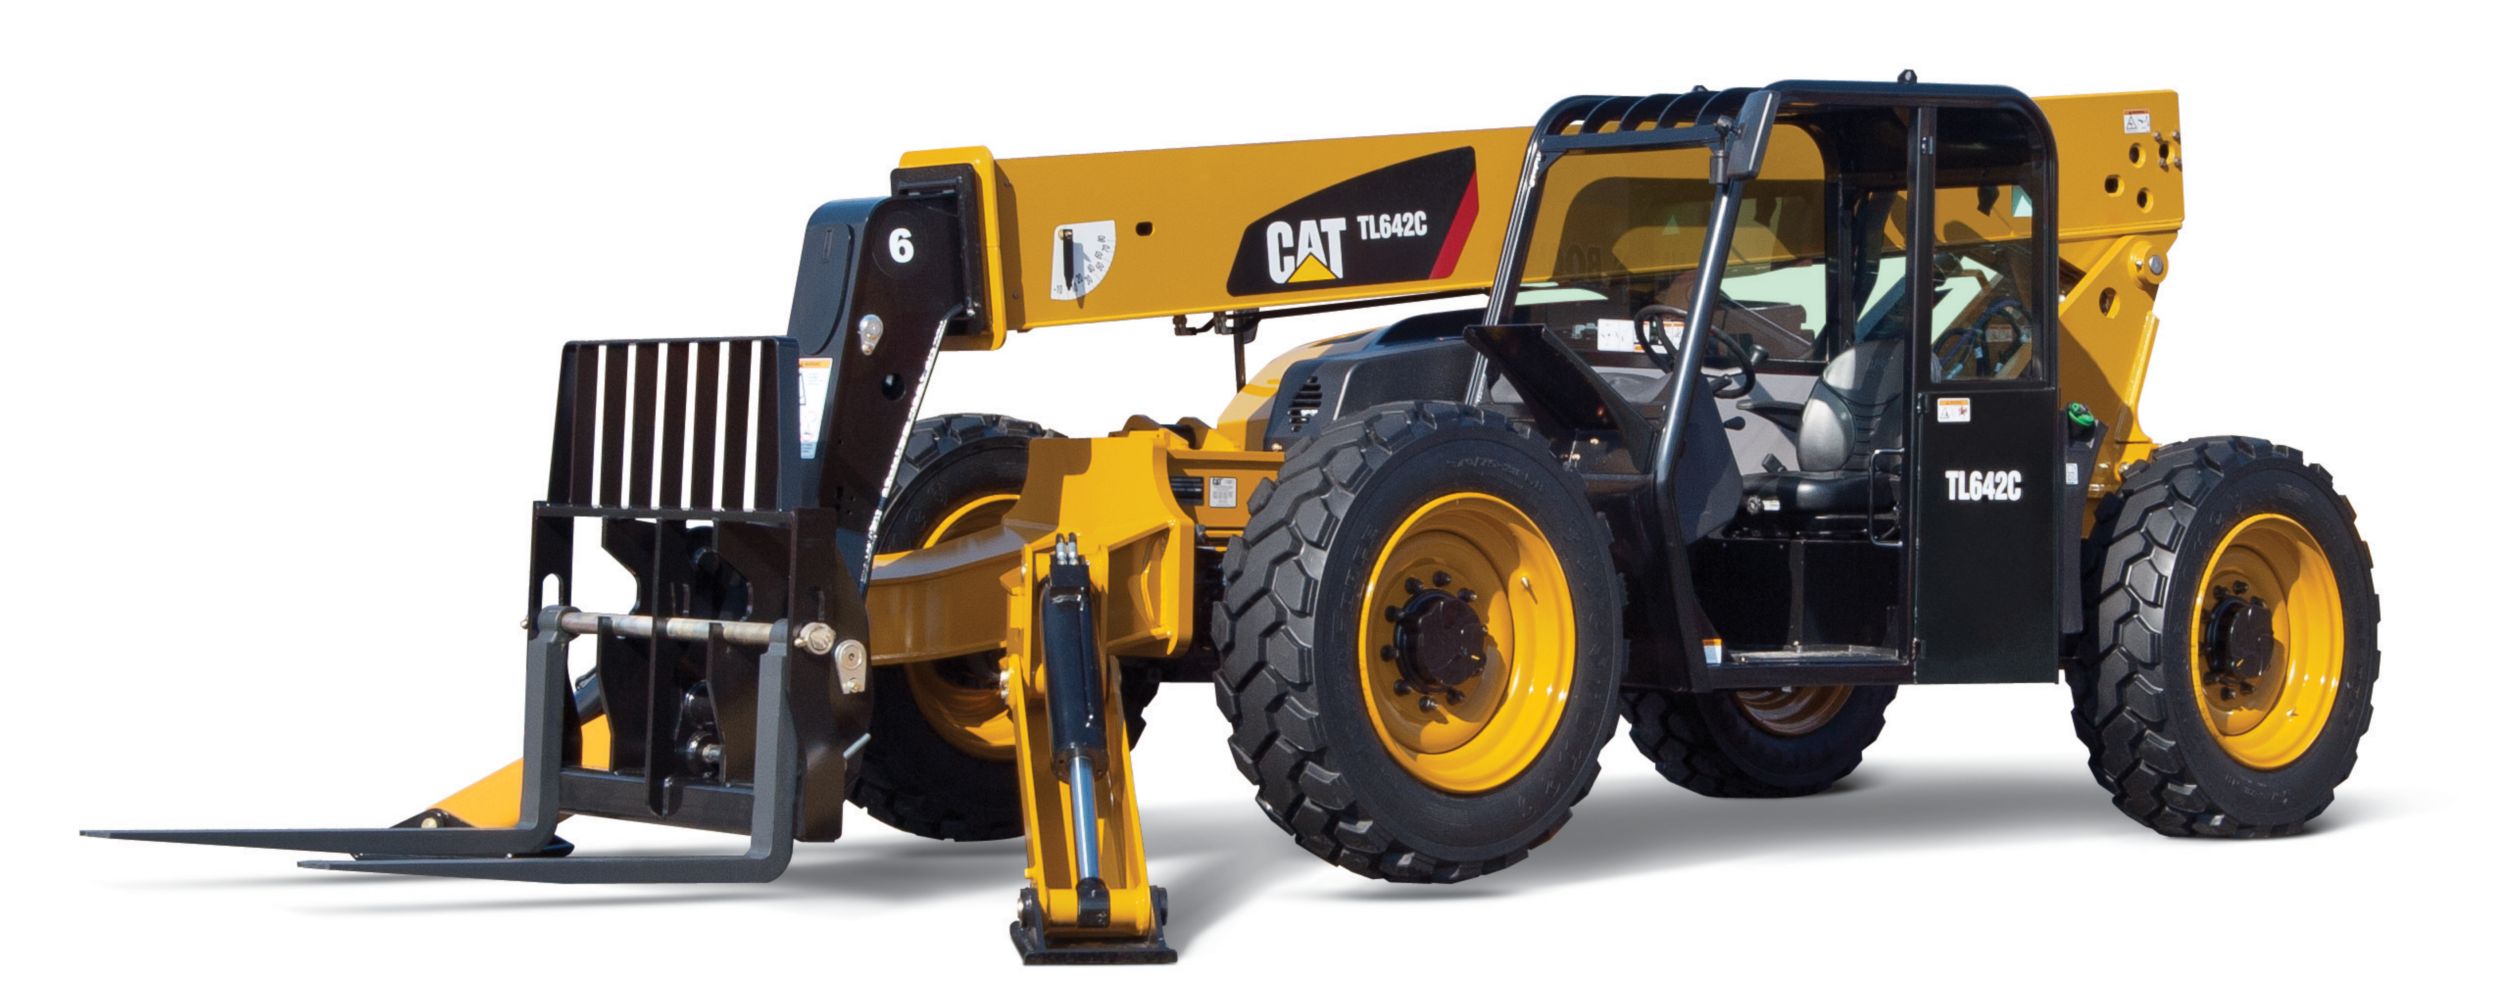 TL642C with Stabilizers Telehandler